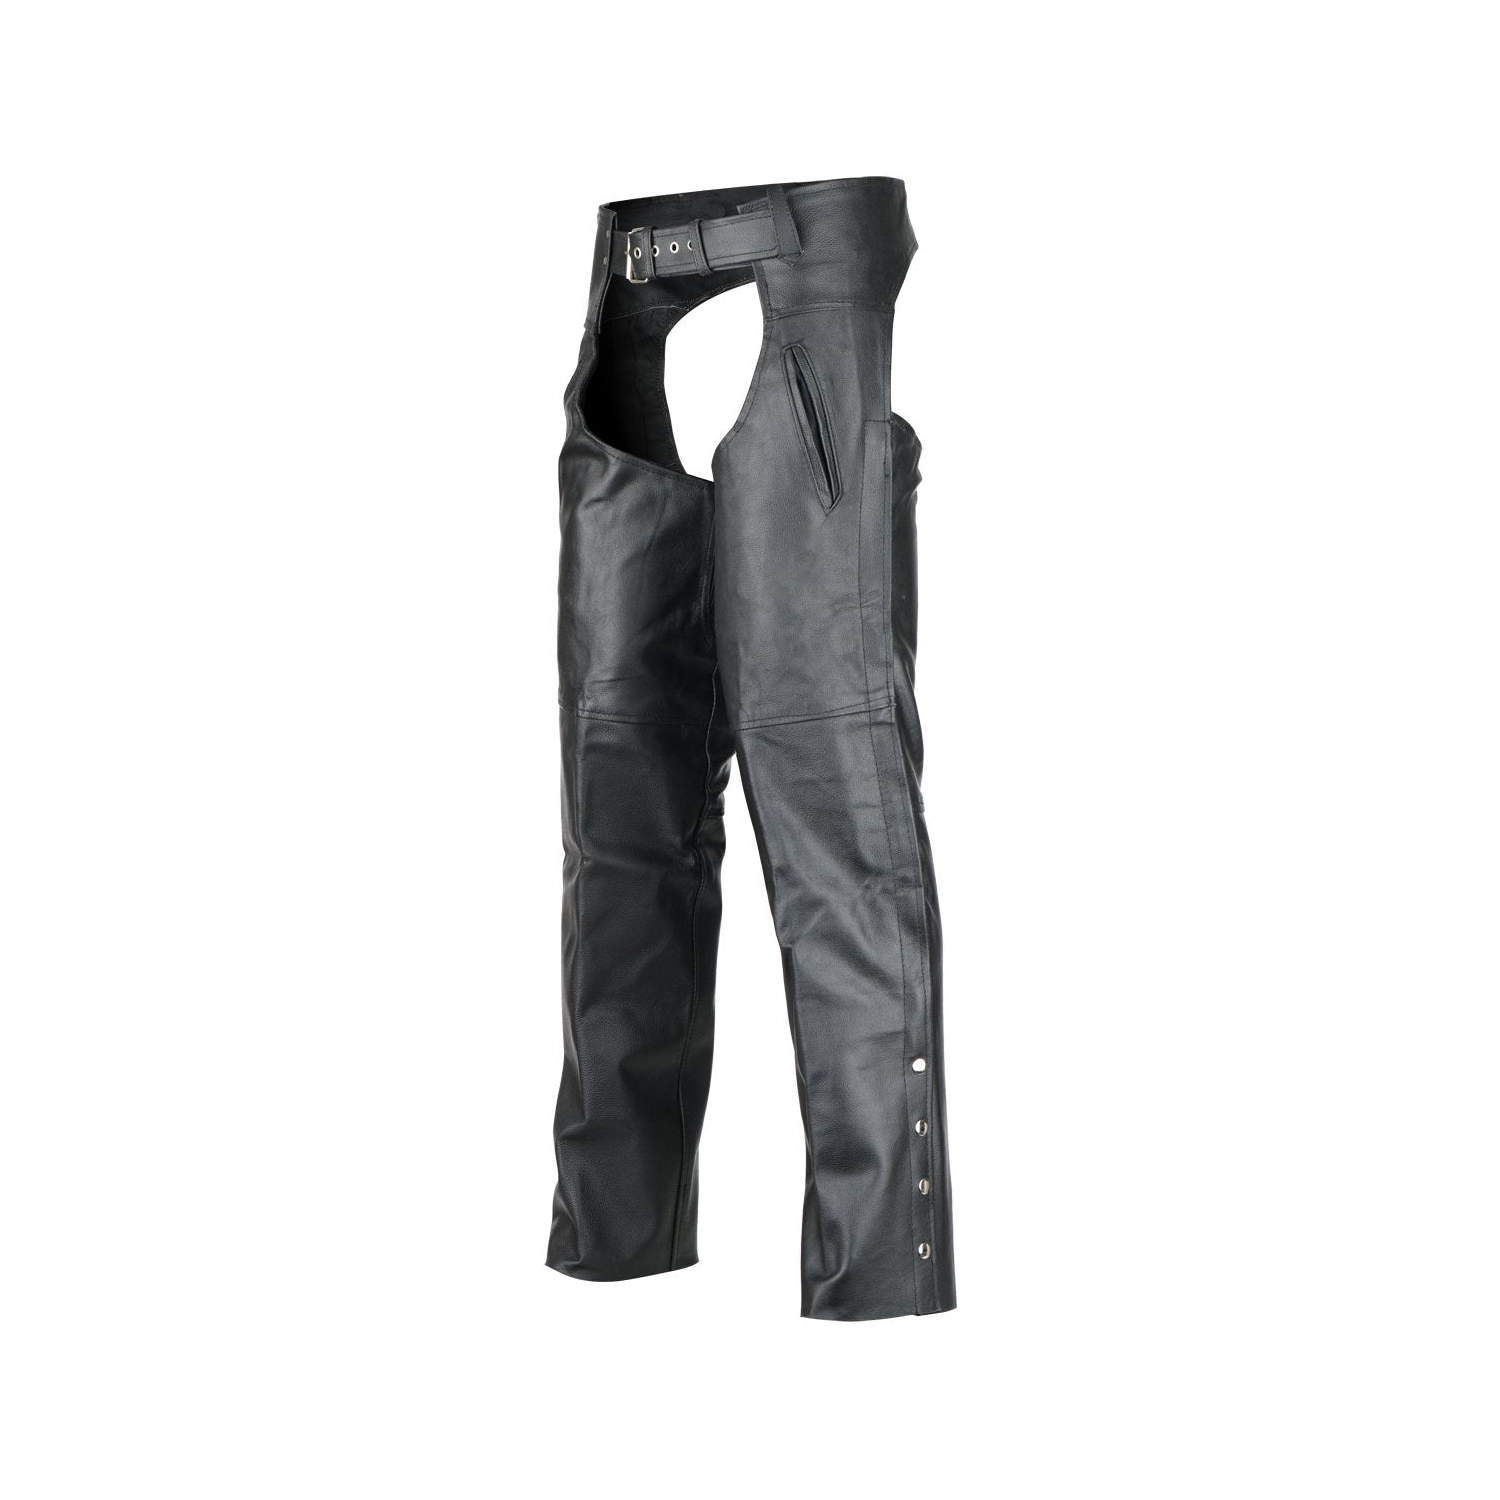 Vance leather Deep Pocket Motorcycle Leather Chaps